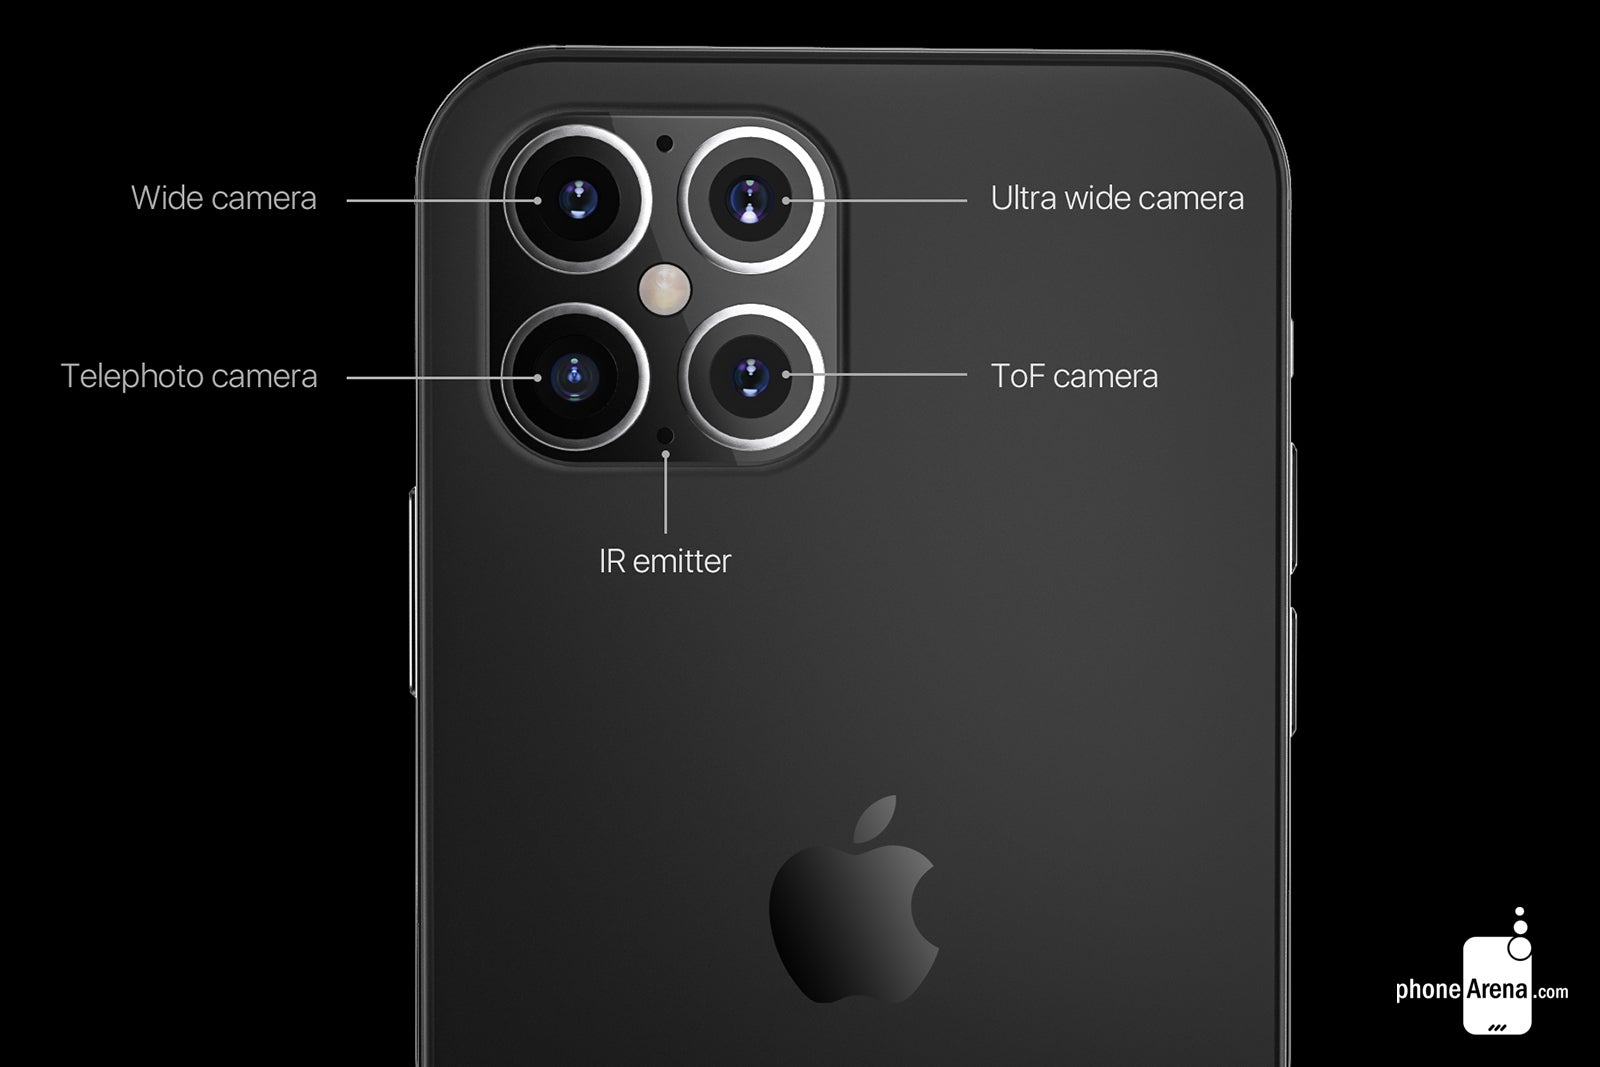 Render shows the quad-camera setup expected on the Apple iPhone 12 Pro Max - Report suggests that BOE will supply Apple with OLED panels for its 5G 2020 iPhone models